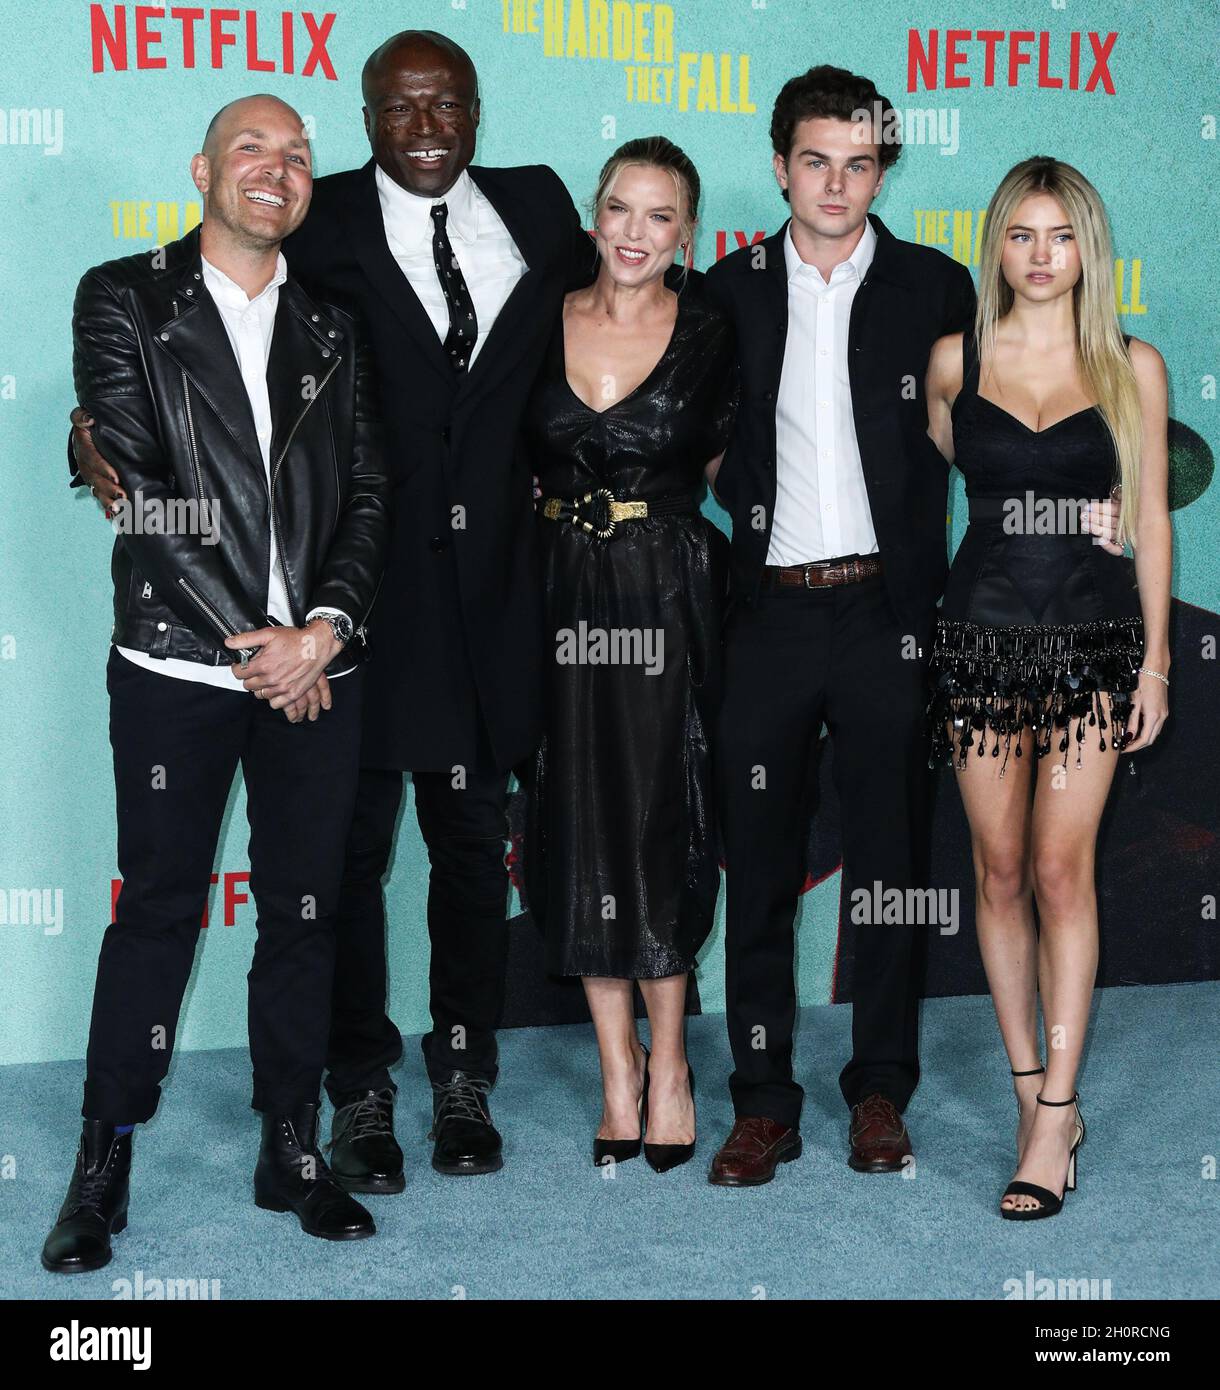 Los Angeles, United States. 13th Oct, 2021. LOS ANGELES, CALIFORNIA, USA - OCTOBER 13: Singer-songwriter Seal (Henry Olusegun Adeola Samuel), girlfriend Laura Strayer, Aris Rachevsky and model Leni Olumi Klum arrive at the Los Angeles Premiere Of Netflix's 'The Harder They Fall' held at the Shrine Auditorium and Expo Hall on October 13, 2021 in Los Angeles, California, United States. (Photo by Xavier Collin/Image Press Agency/Sipa USA) Credit: Sipa USA/Alamy Live News Stock Photo